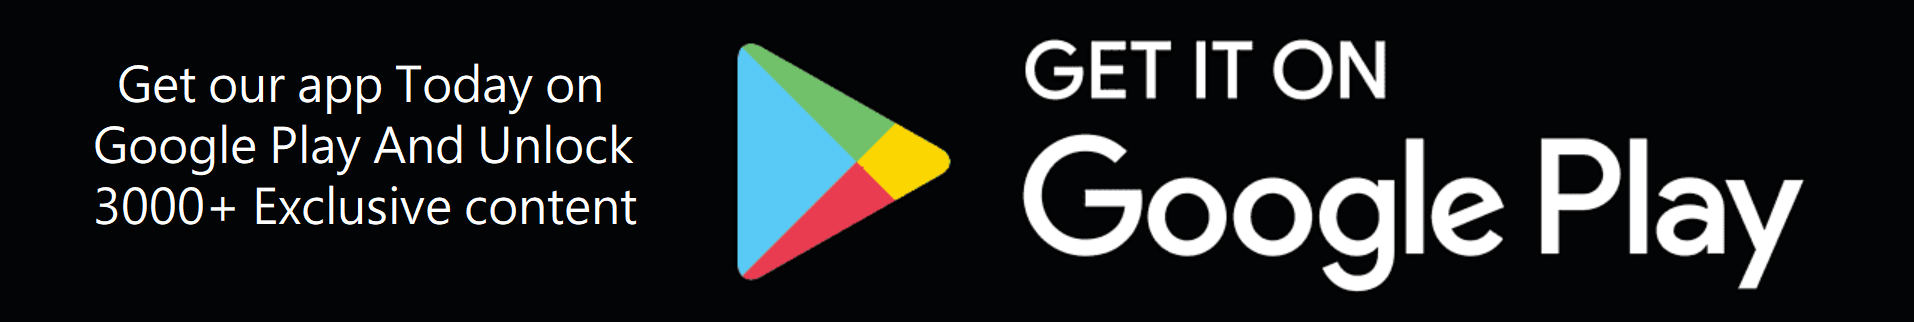 Get our app on Google play